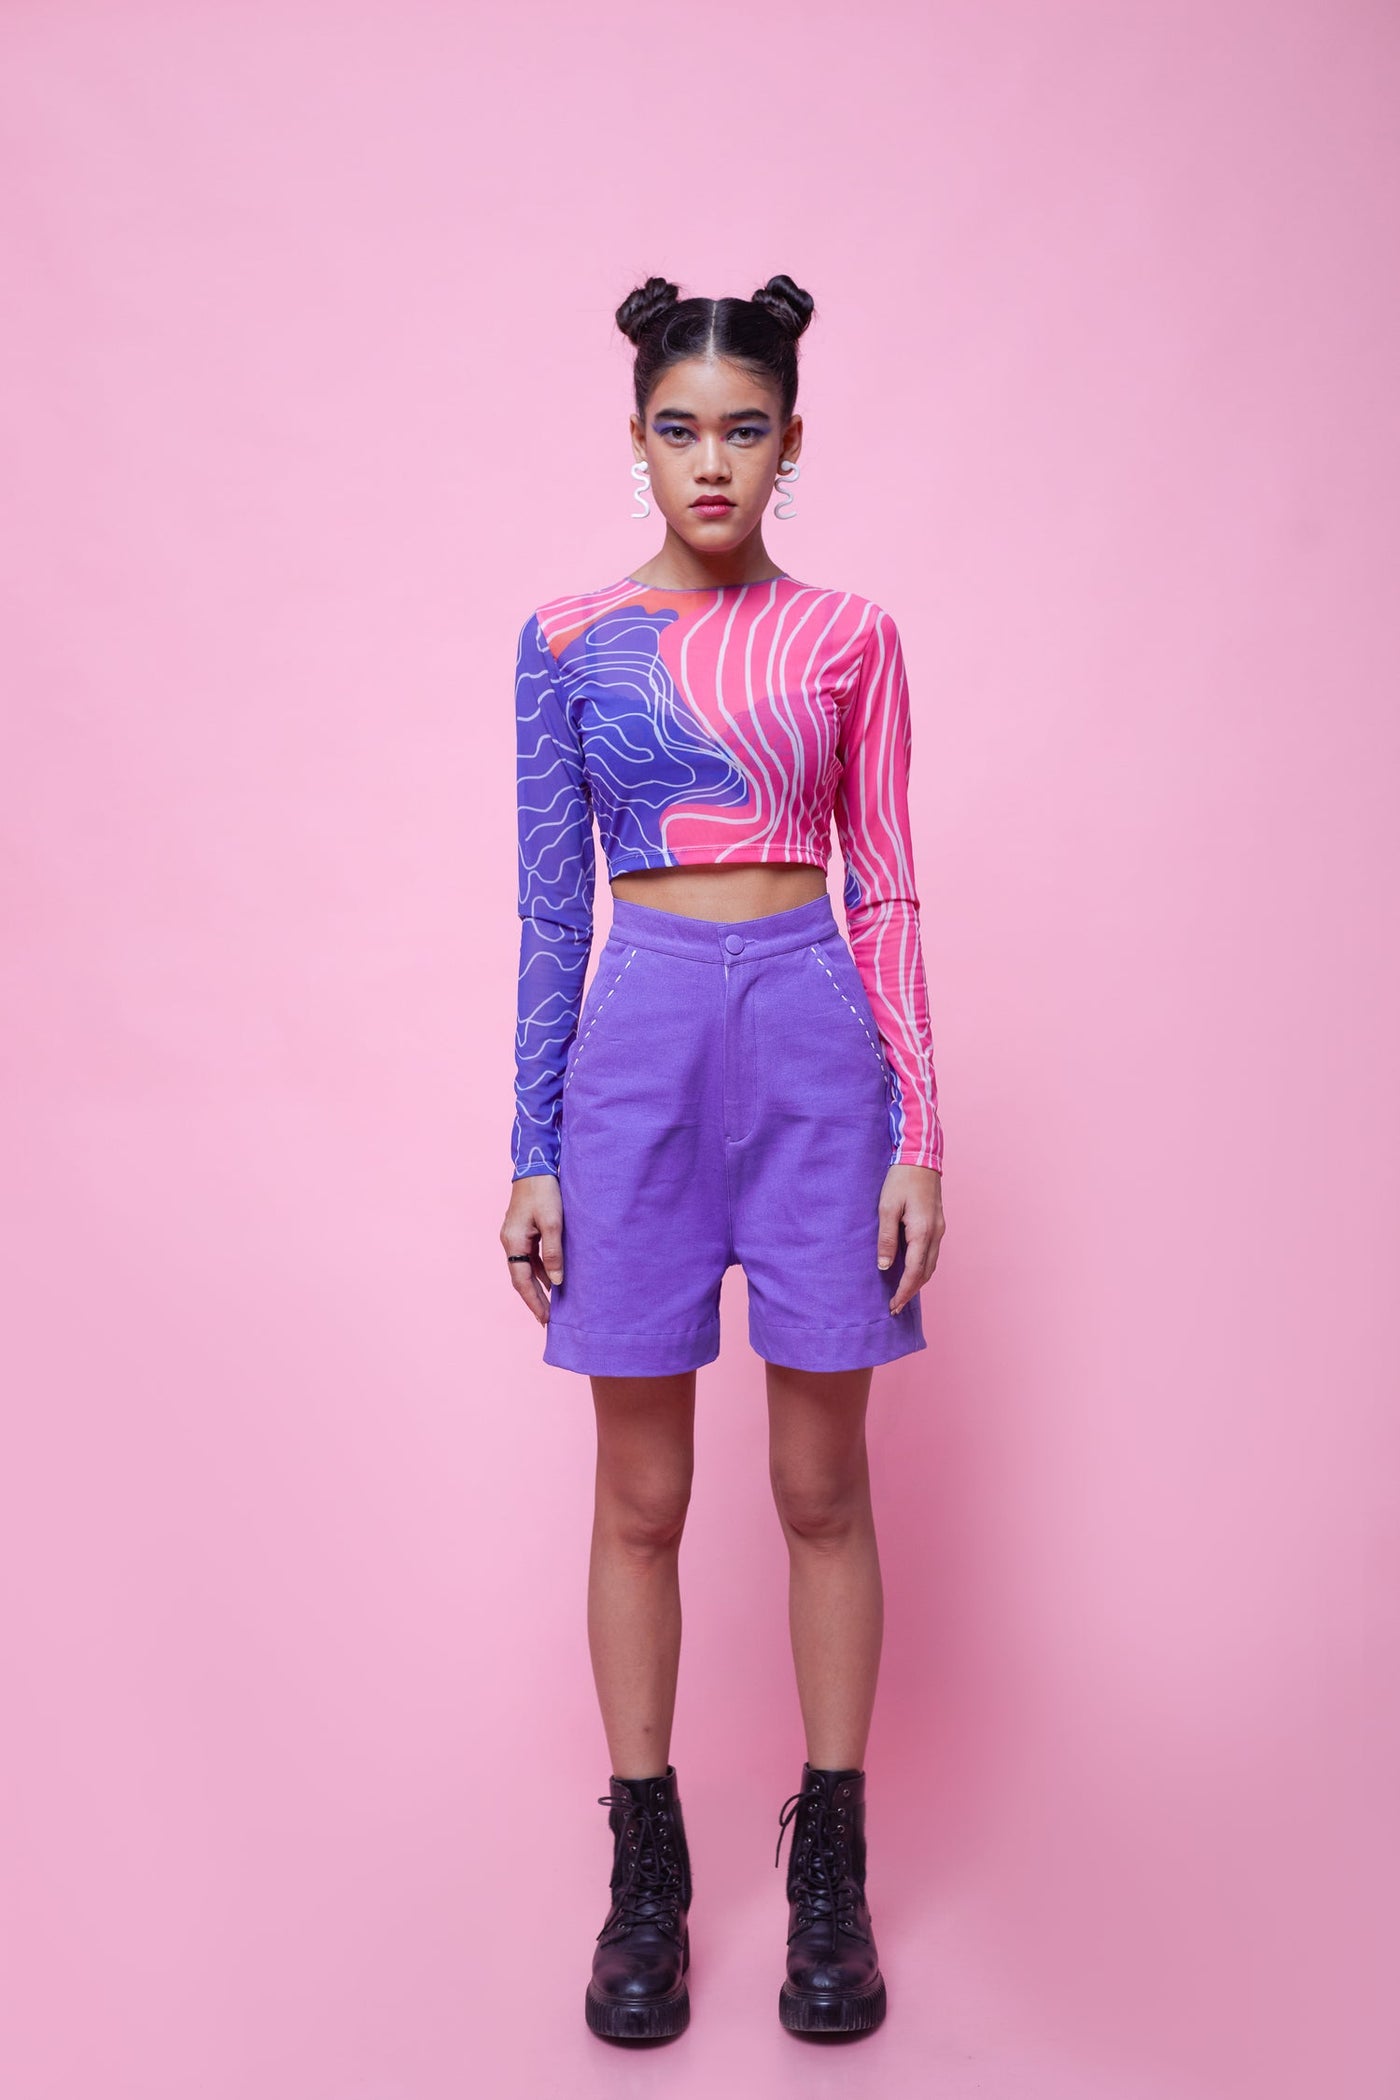 MILKY WAY TOP AND PURPLE SPY SHORTS CO-ORD SET